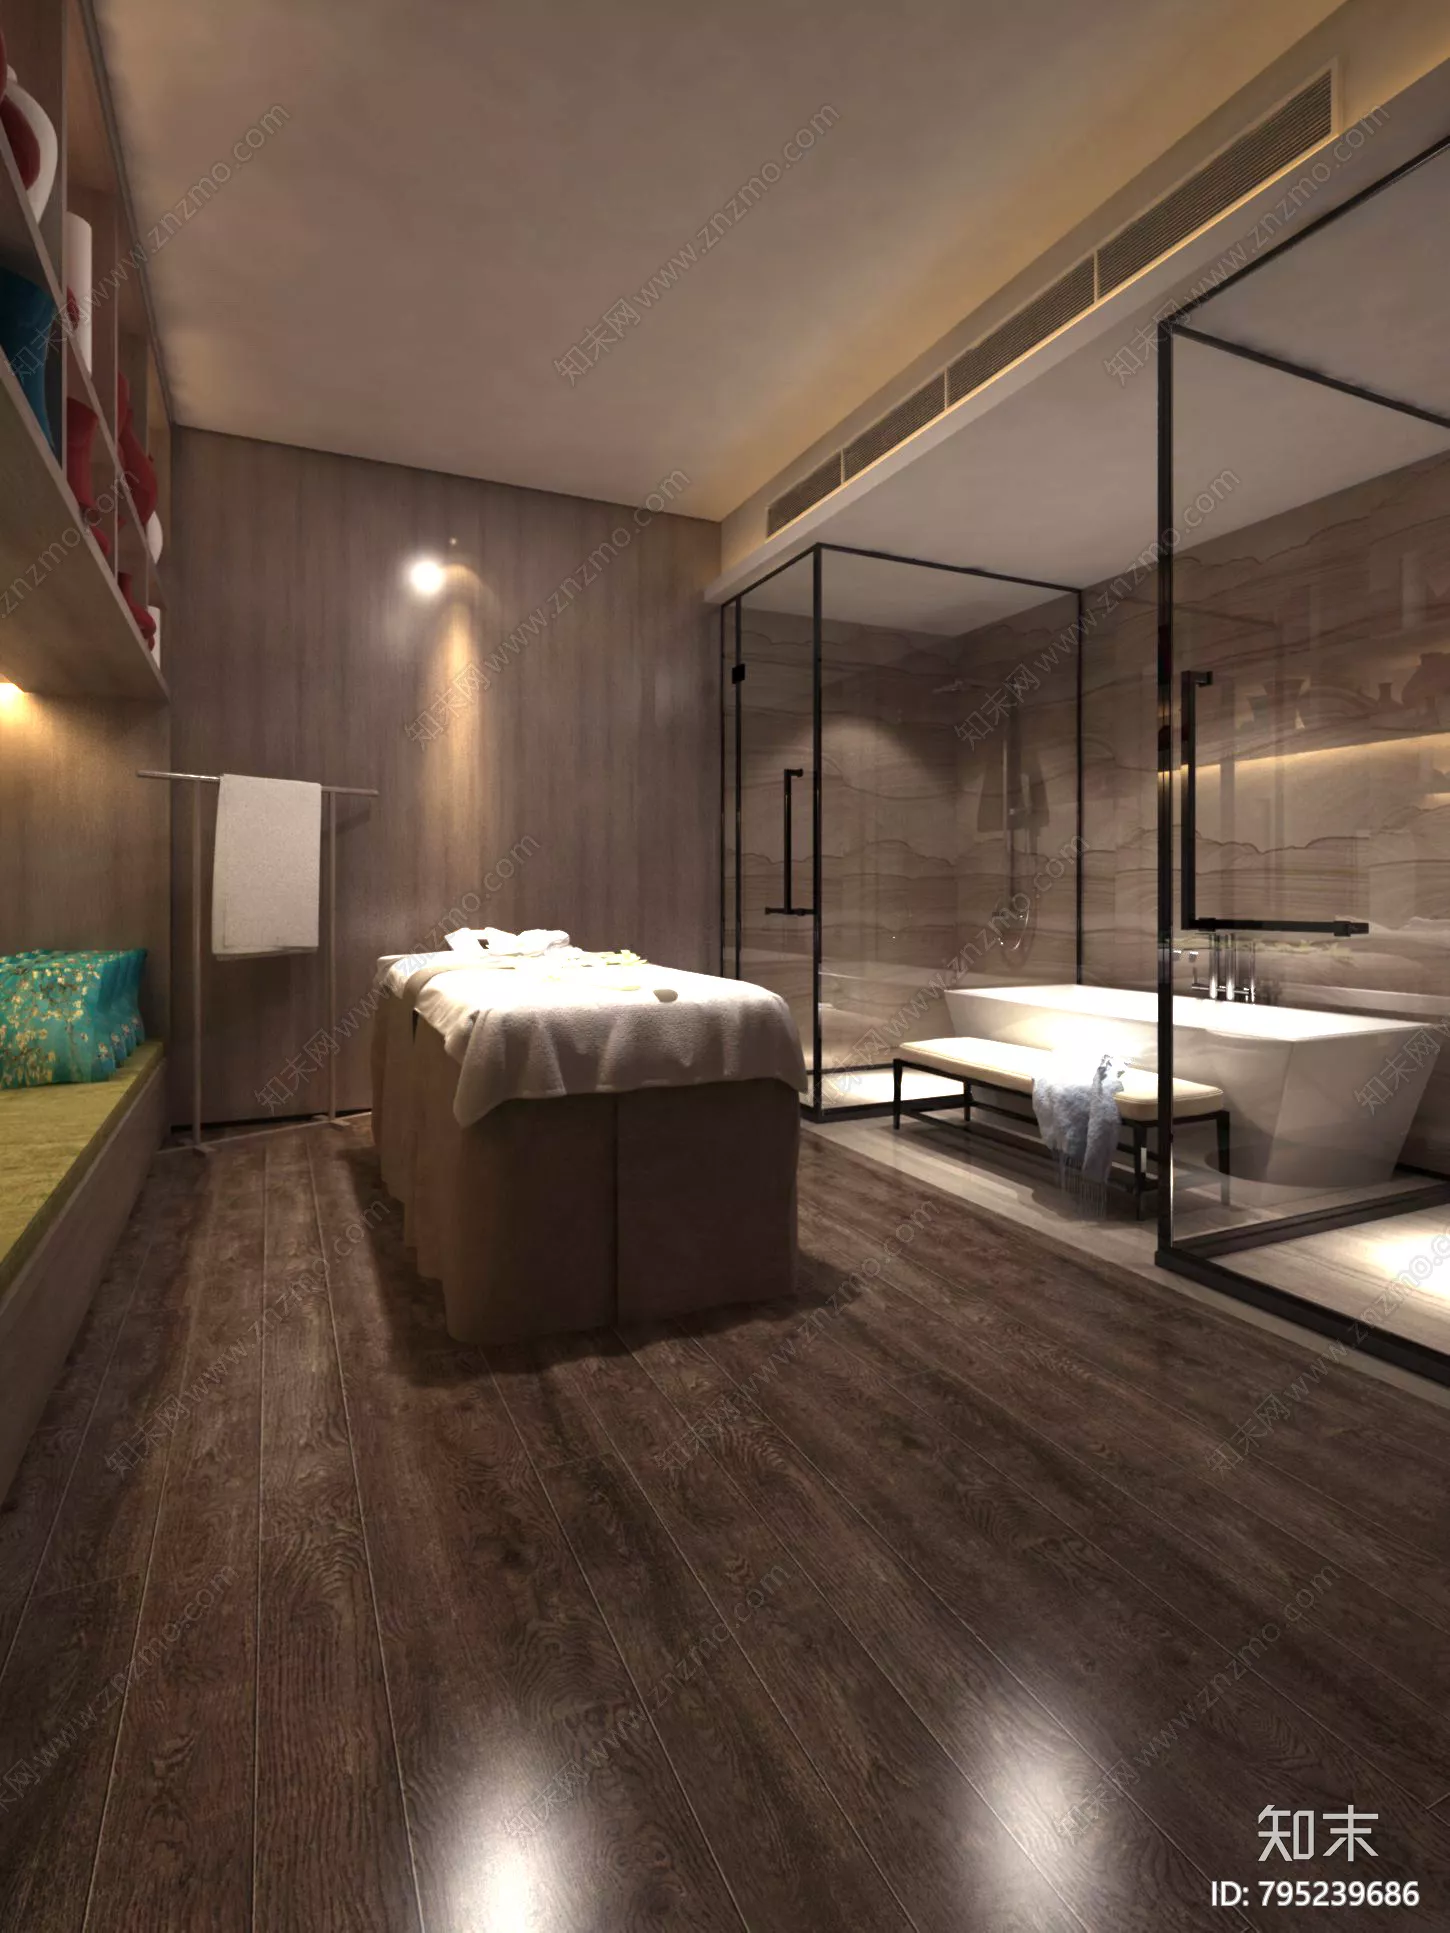 MODERN SPA AND BEAUTY - SKETCHUP 3D SCENE - VRAY OR ENSCAPE - ID14042